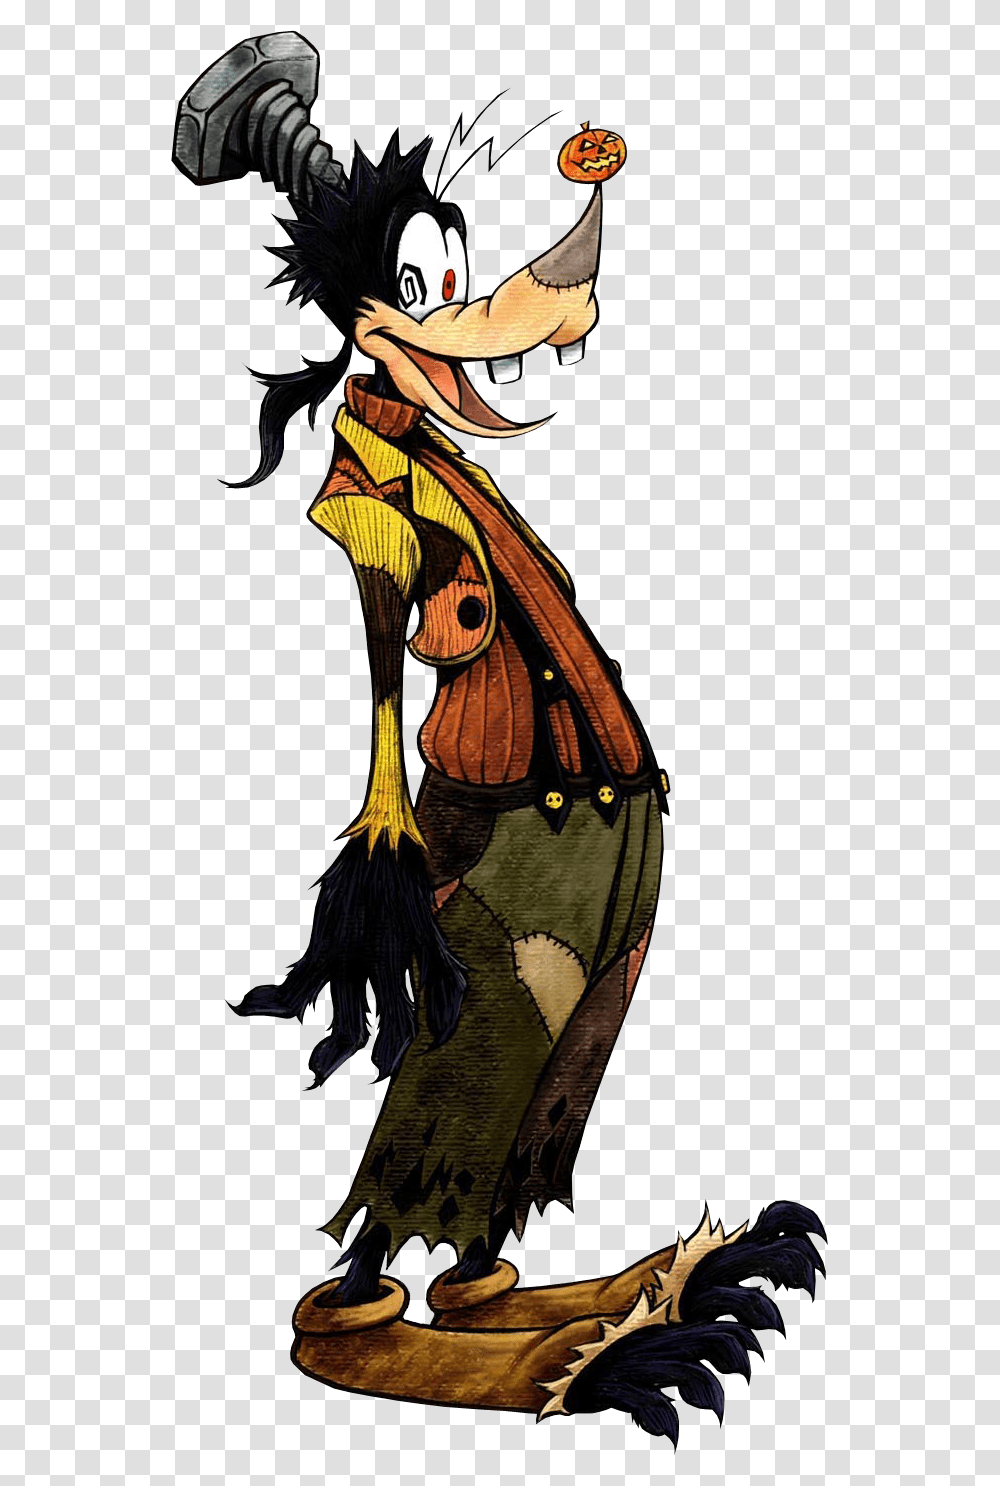 Goofy Picture Kingdom Hearts Goofy Monster, Leisure Activities, Bird, Animal, Person Transparent Png